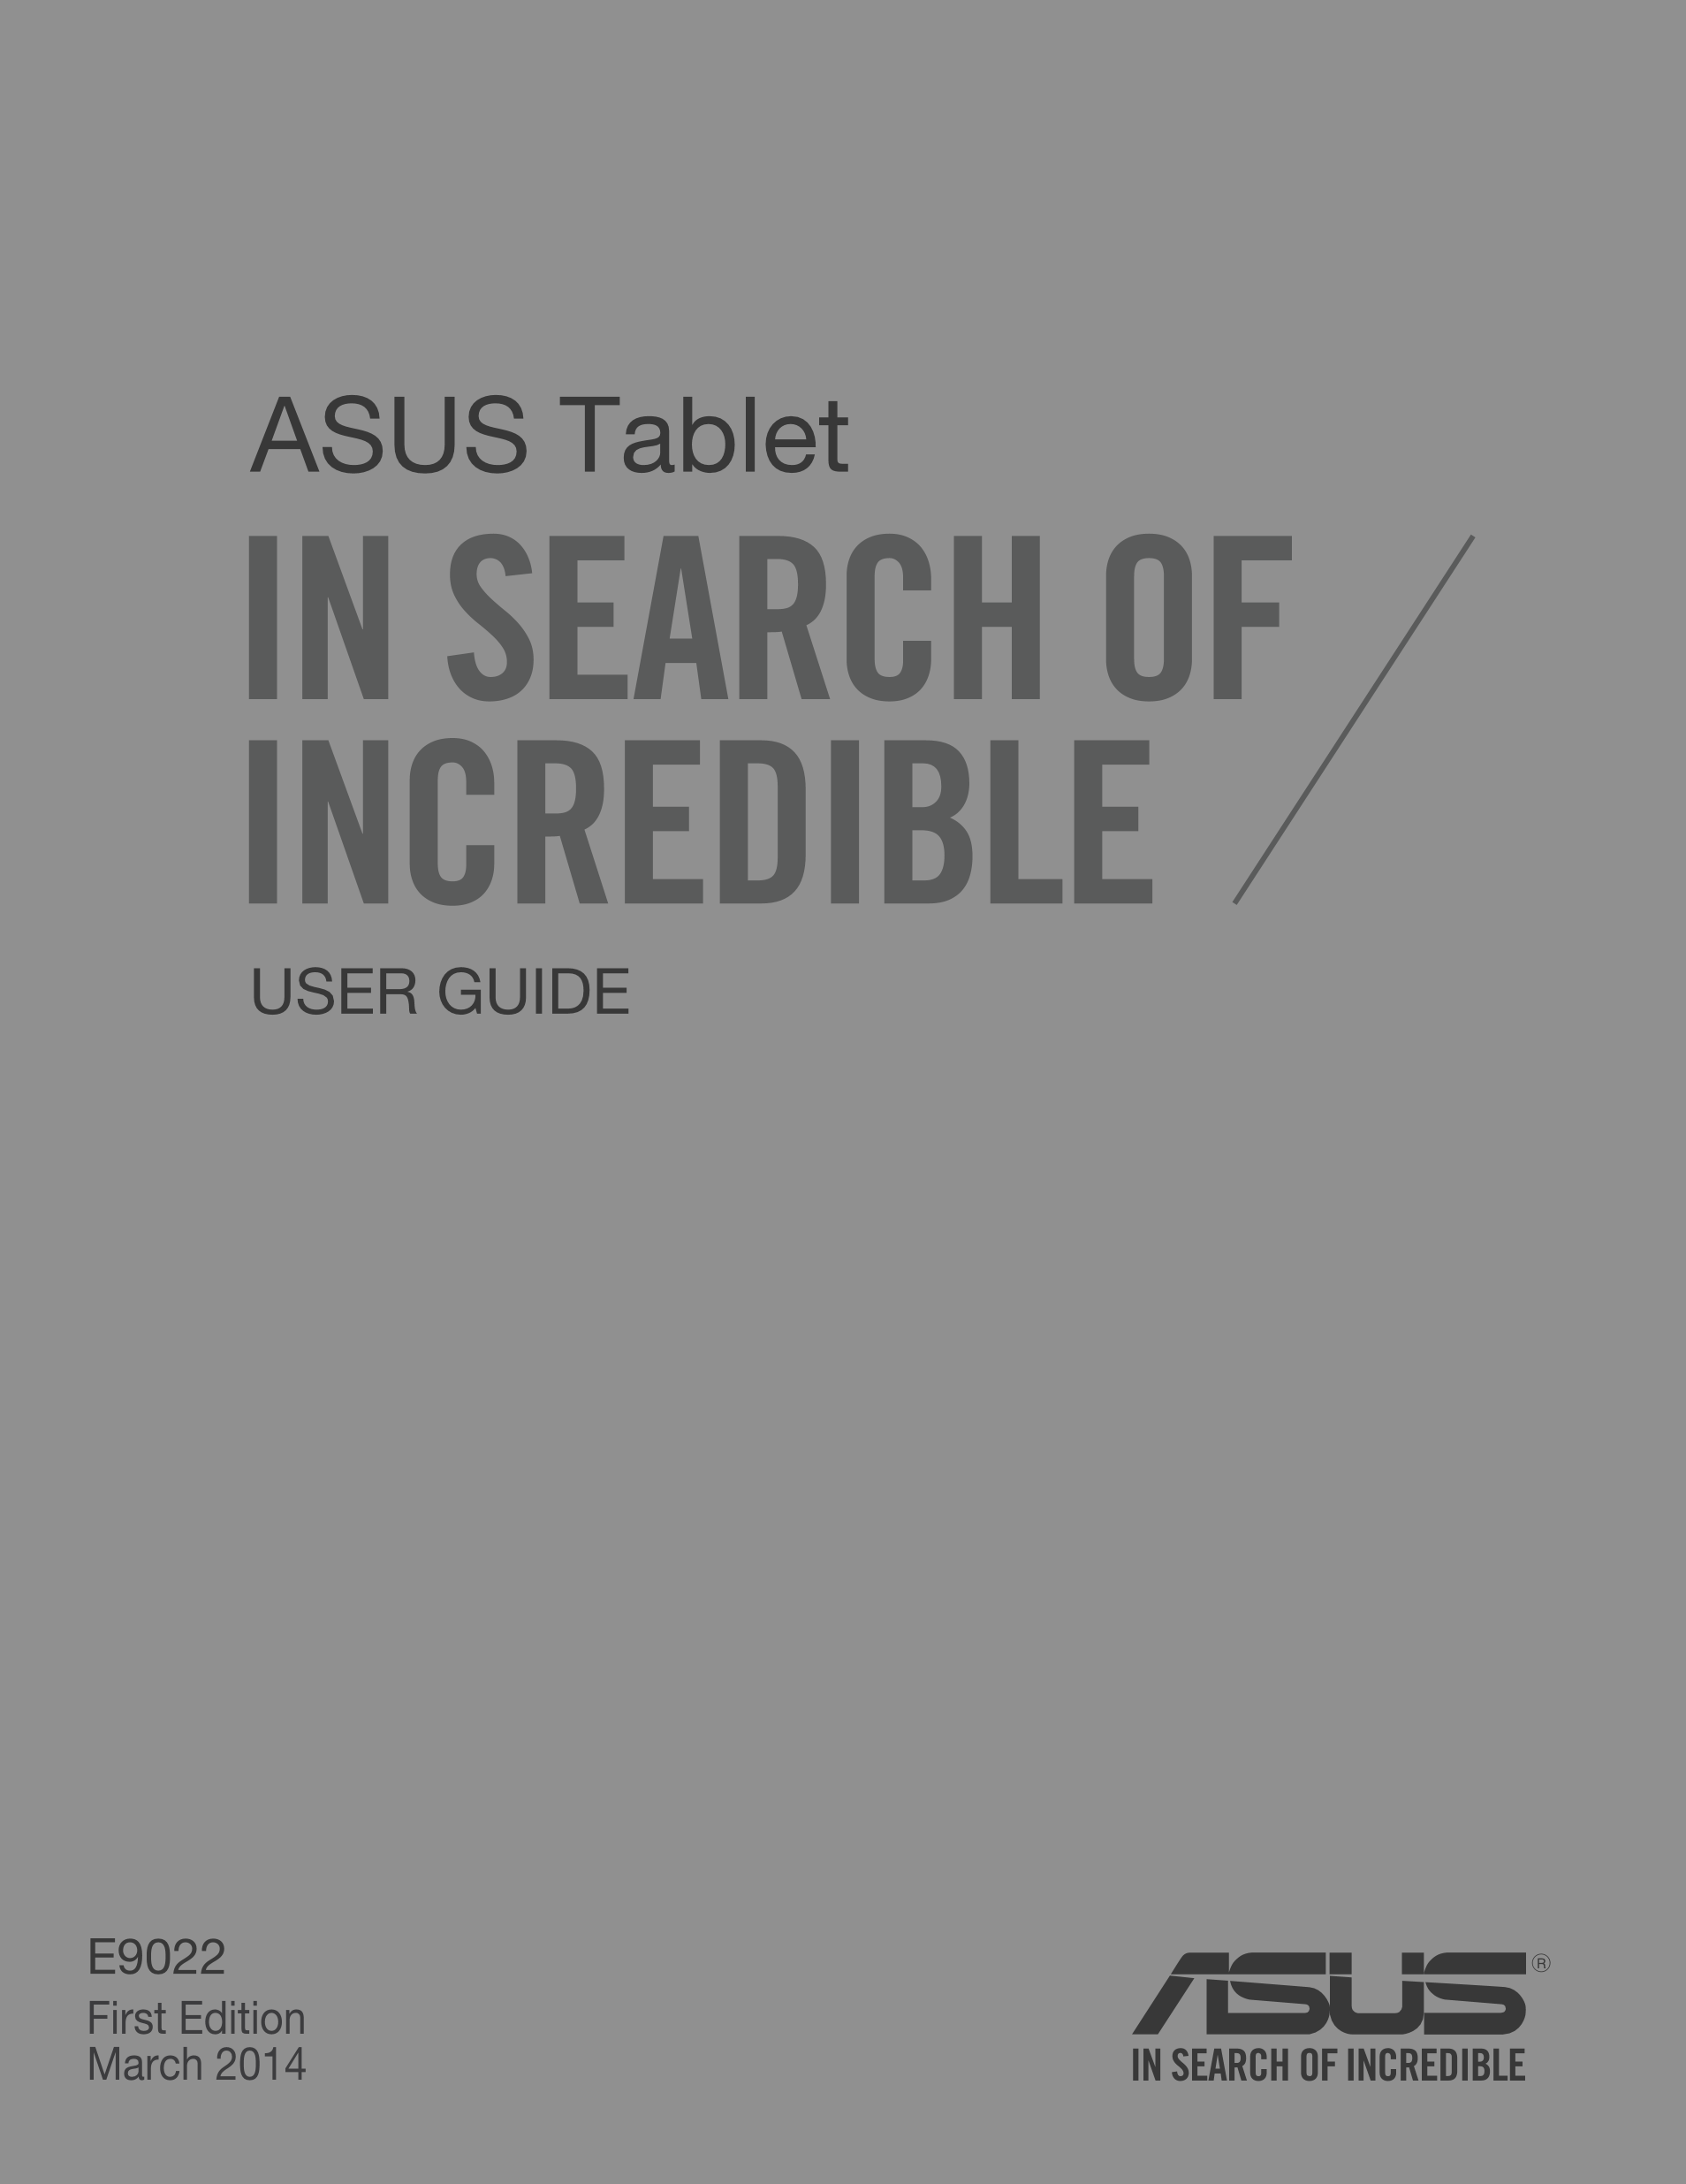 ASUS Tablet
USER GUIDE
E9022
First Edition
March 2014
E9022_FE170CG_User_Guide.indd   1 2014/3/26   �� 02:25:02